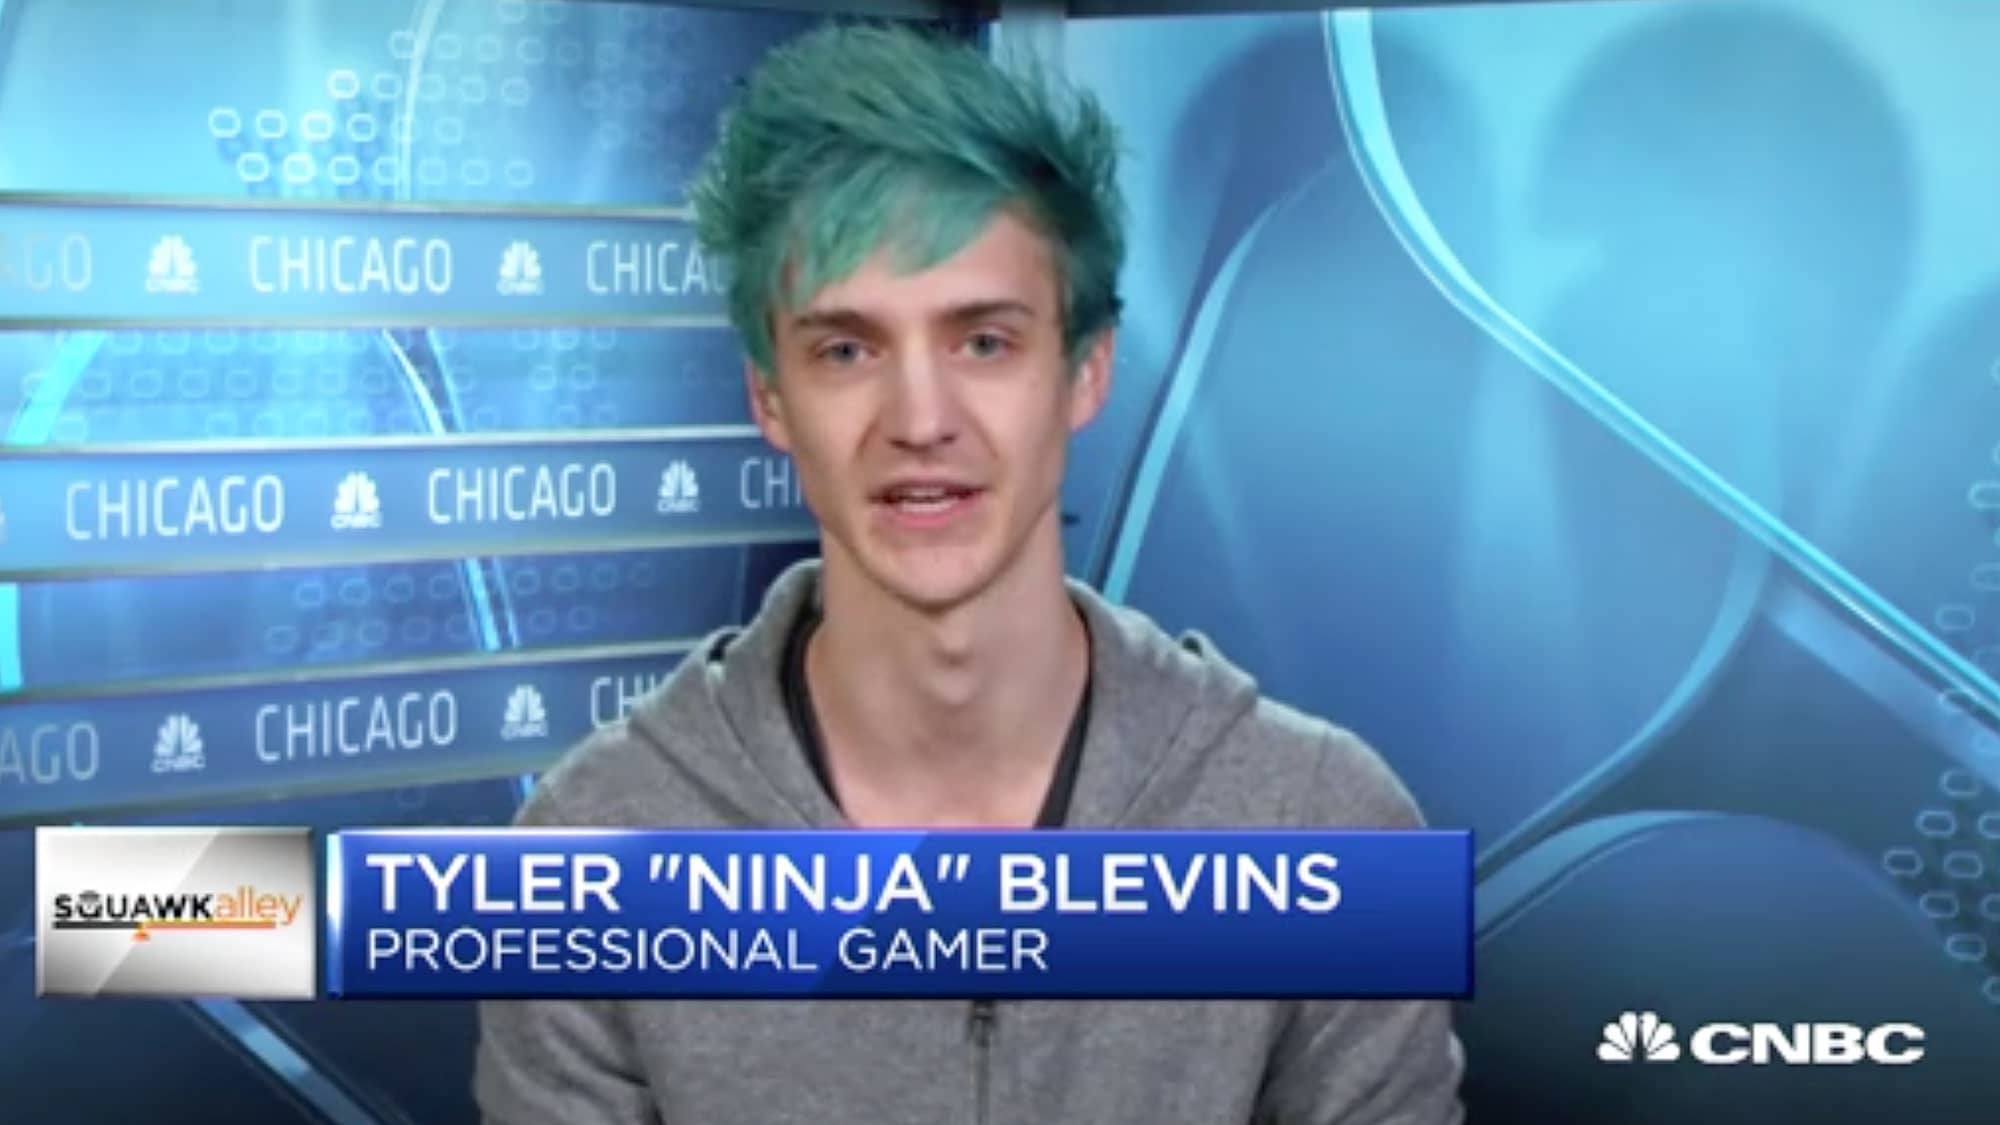 tyler ninja blevins explains how he makes more than 500 000 a month playing video game fortnite - ninja fortnite youtube channel